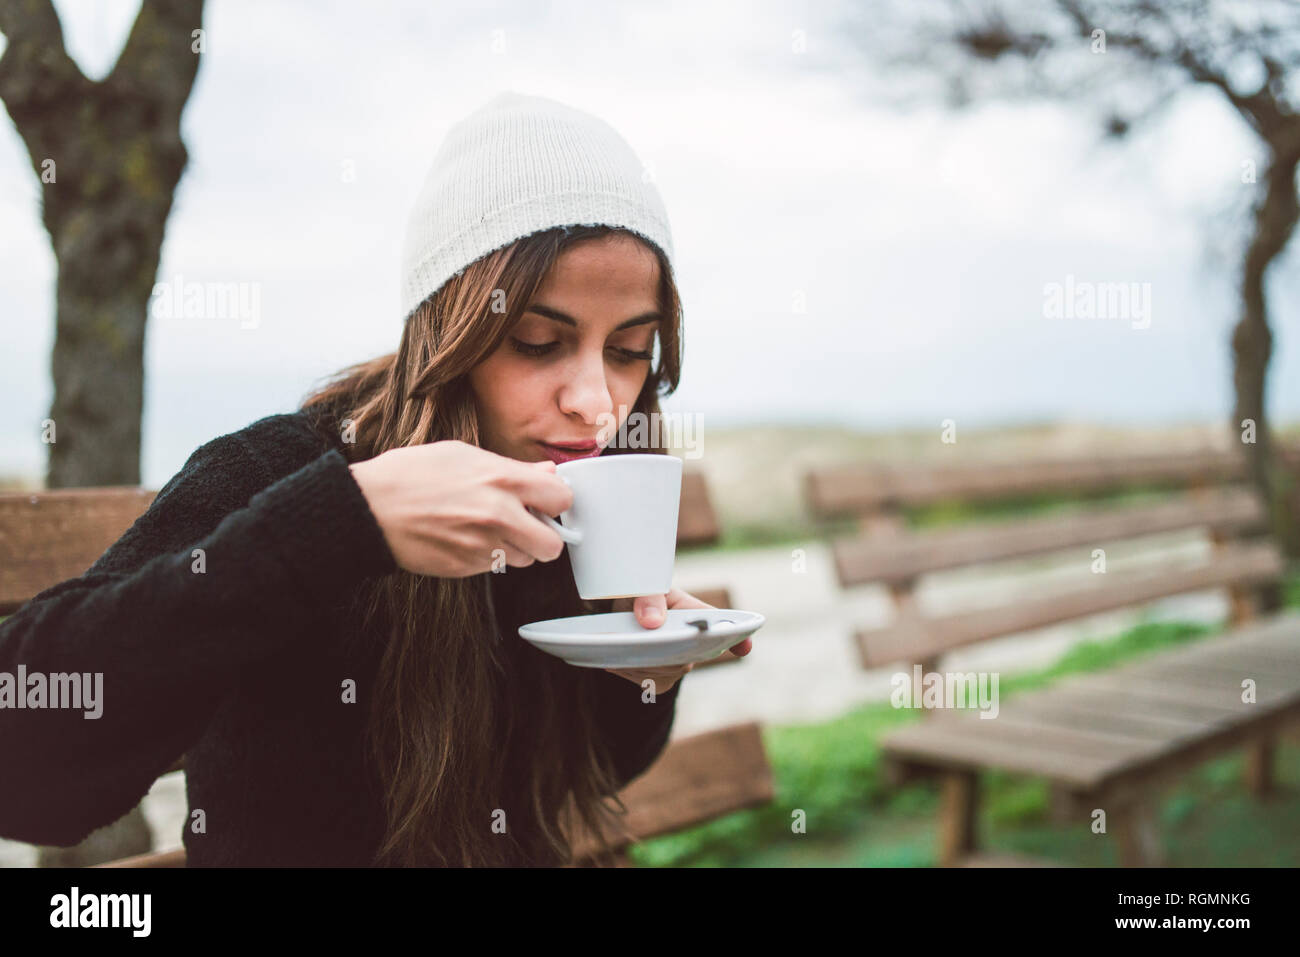 Portrait of young woman drinking cup of coffee outdoors Stock Photo